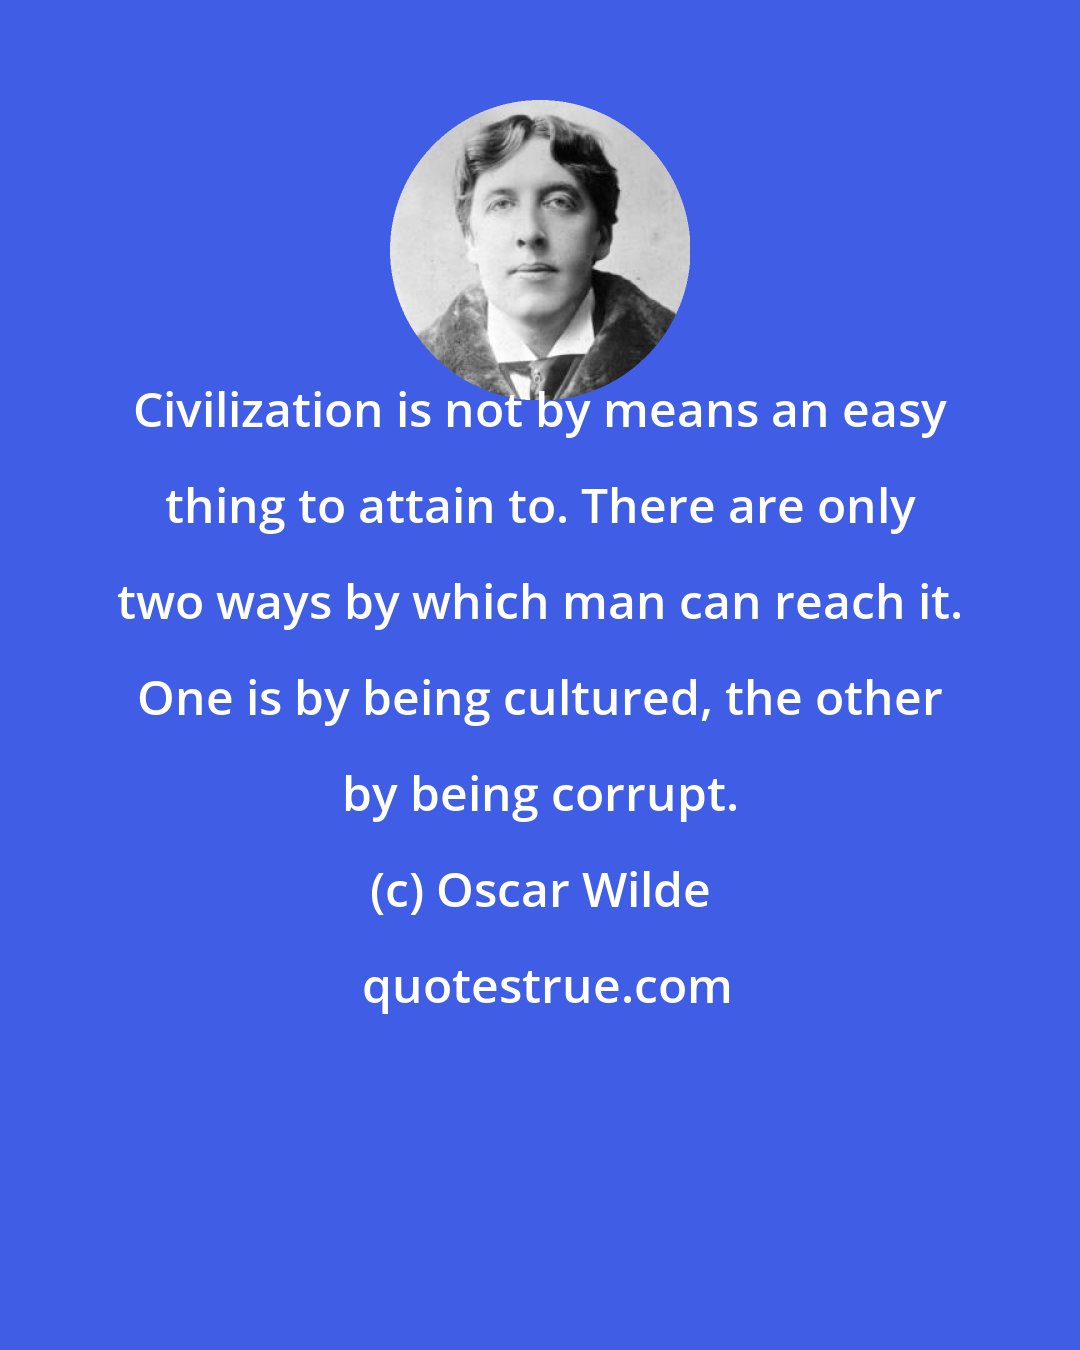 Oscar Wilde: Civilization is not by means an easy thing to attain to. There are only two ways by which man can reach it. One is by being cultured, the other by being corrupt.